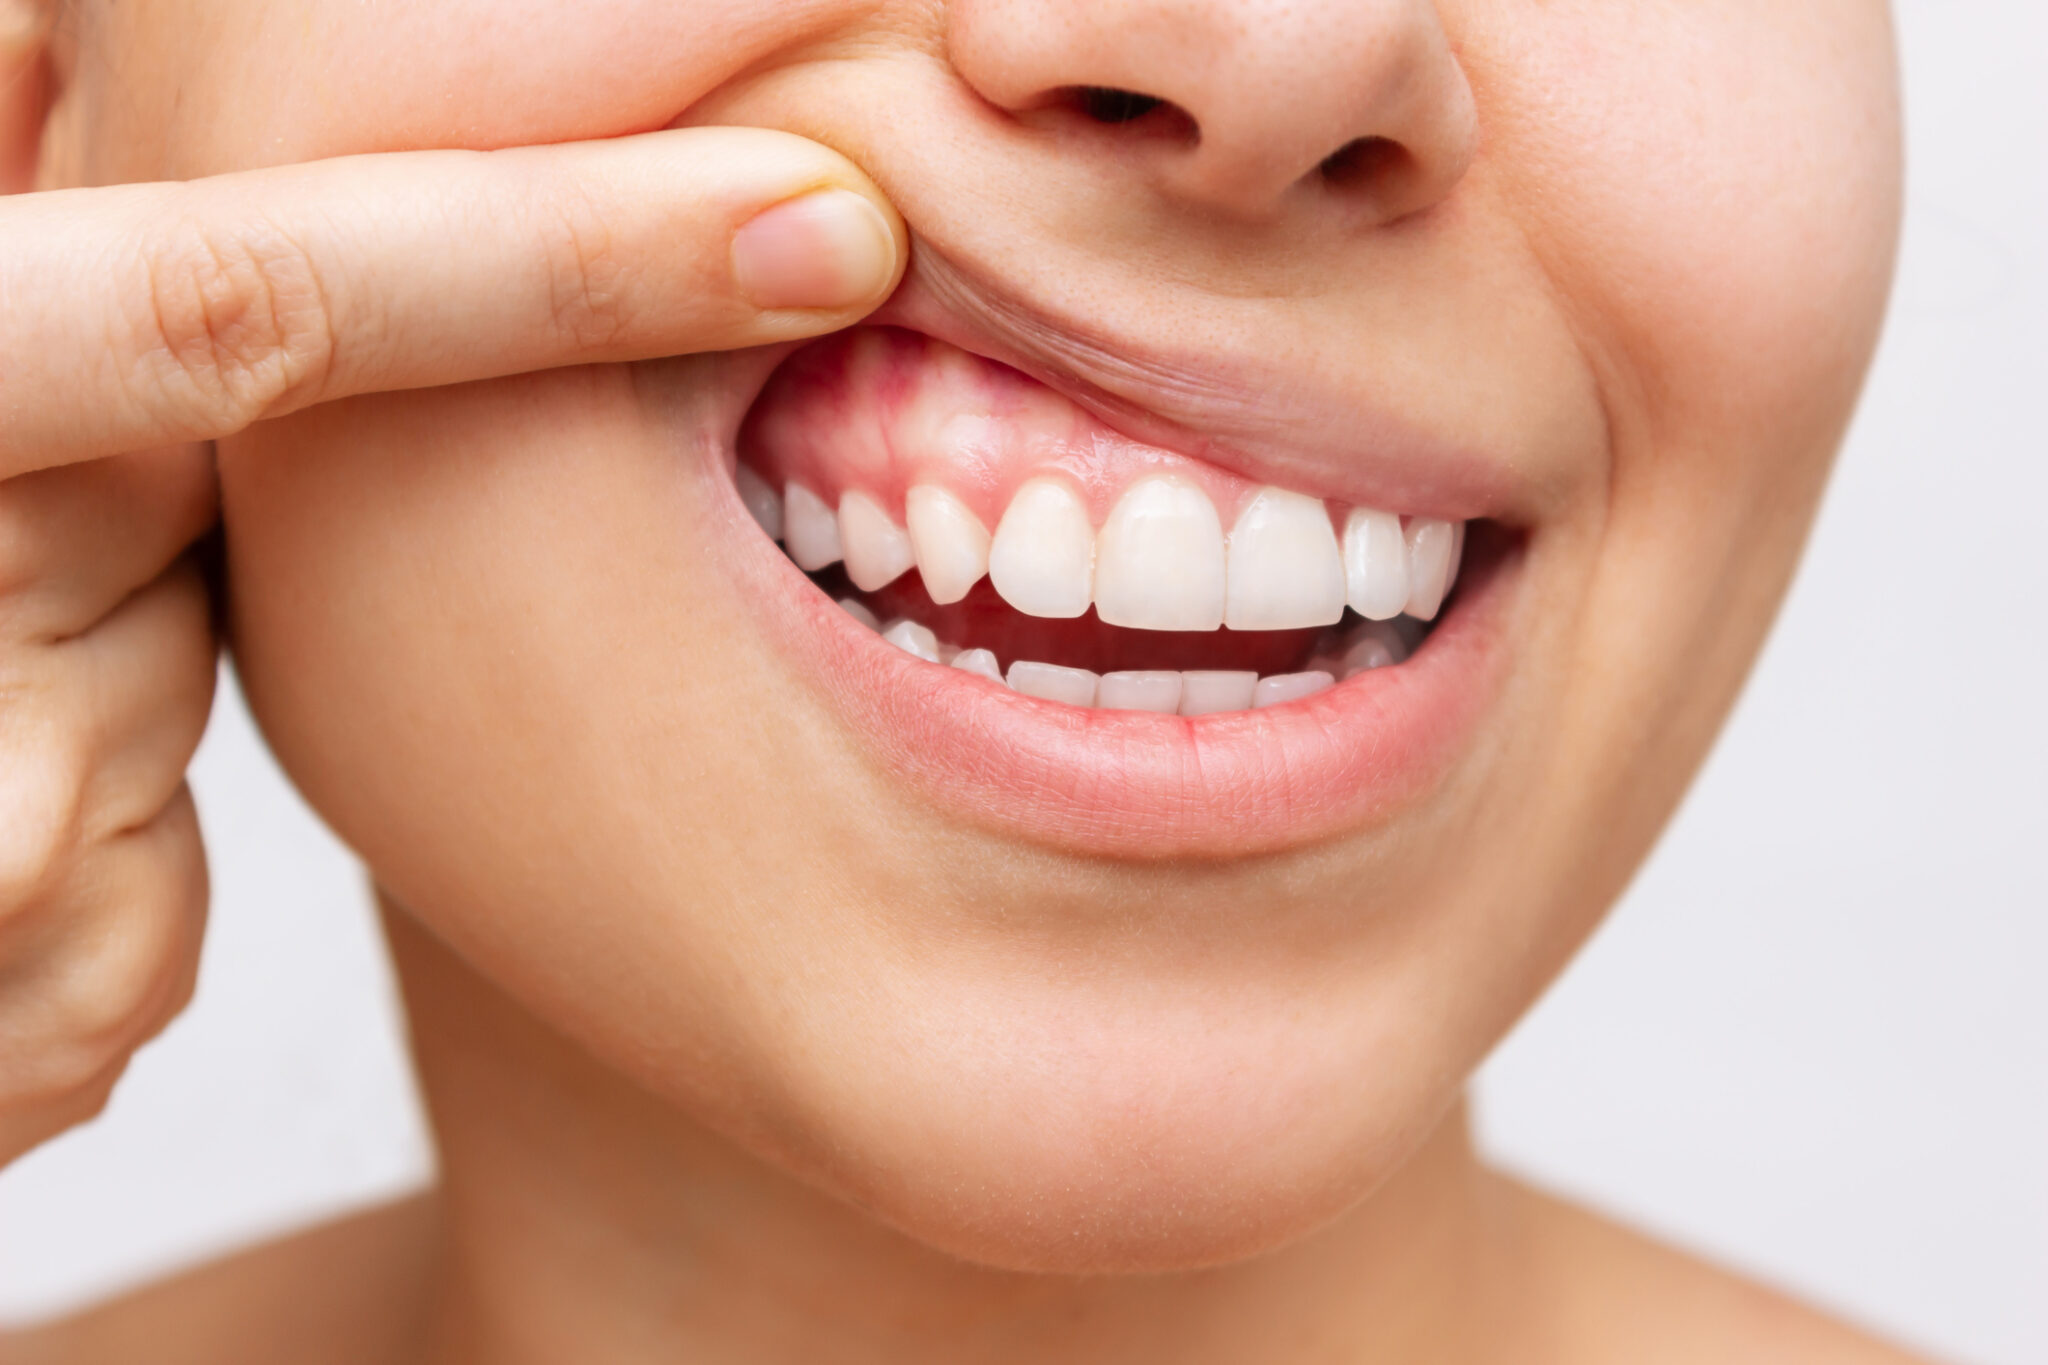 Receding Gums: Symptoms, Consequences, and Remedies